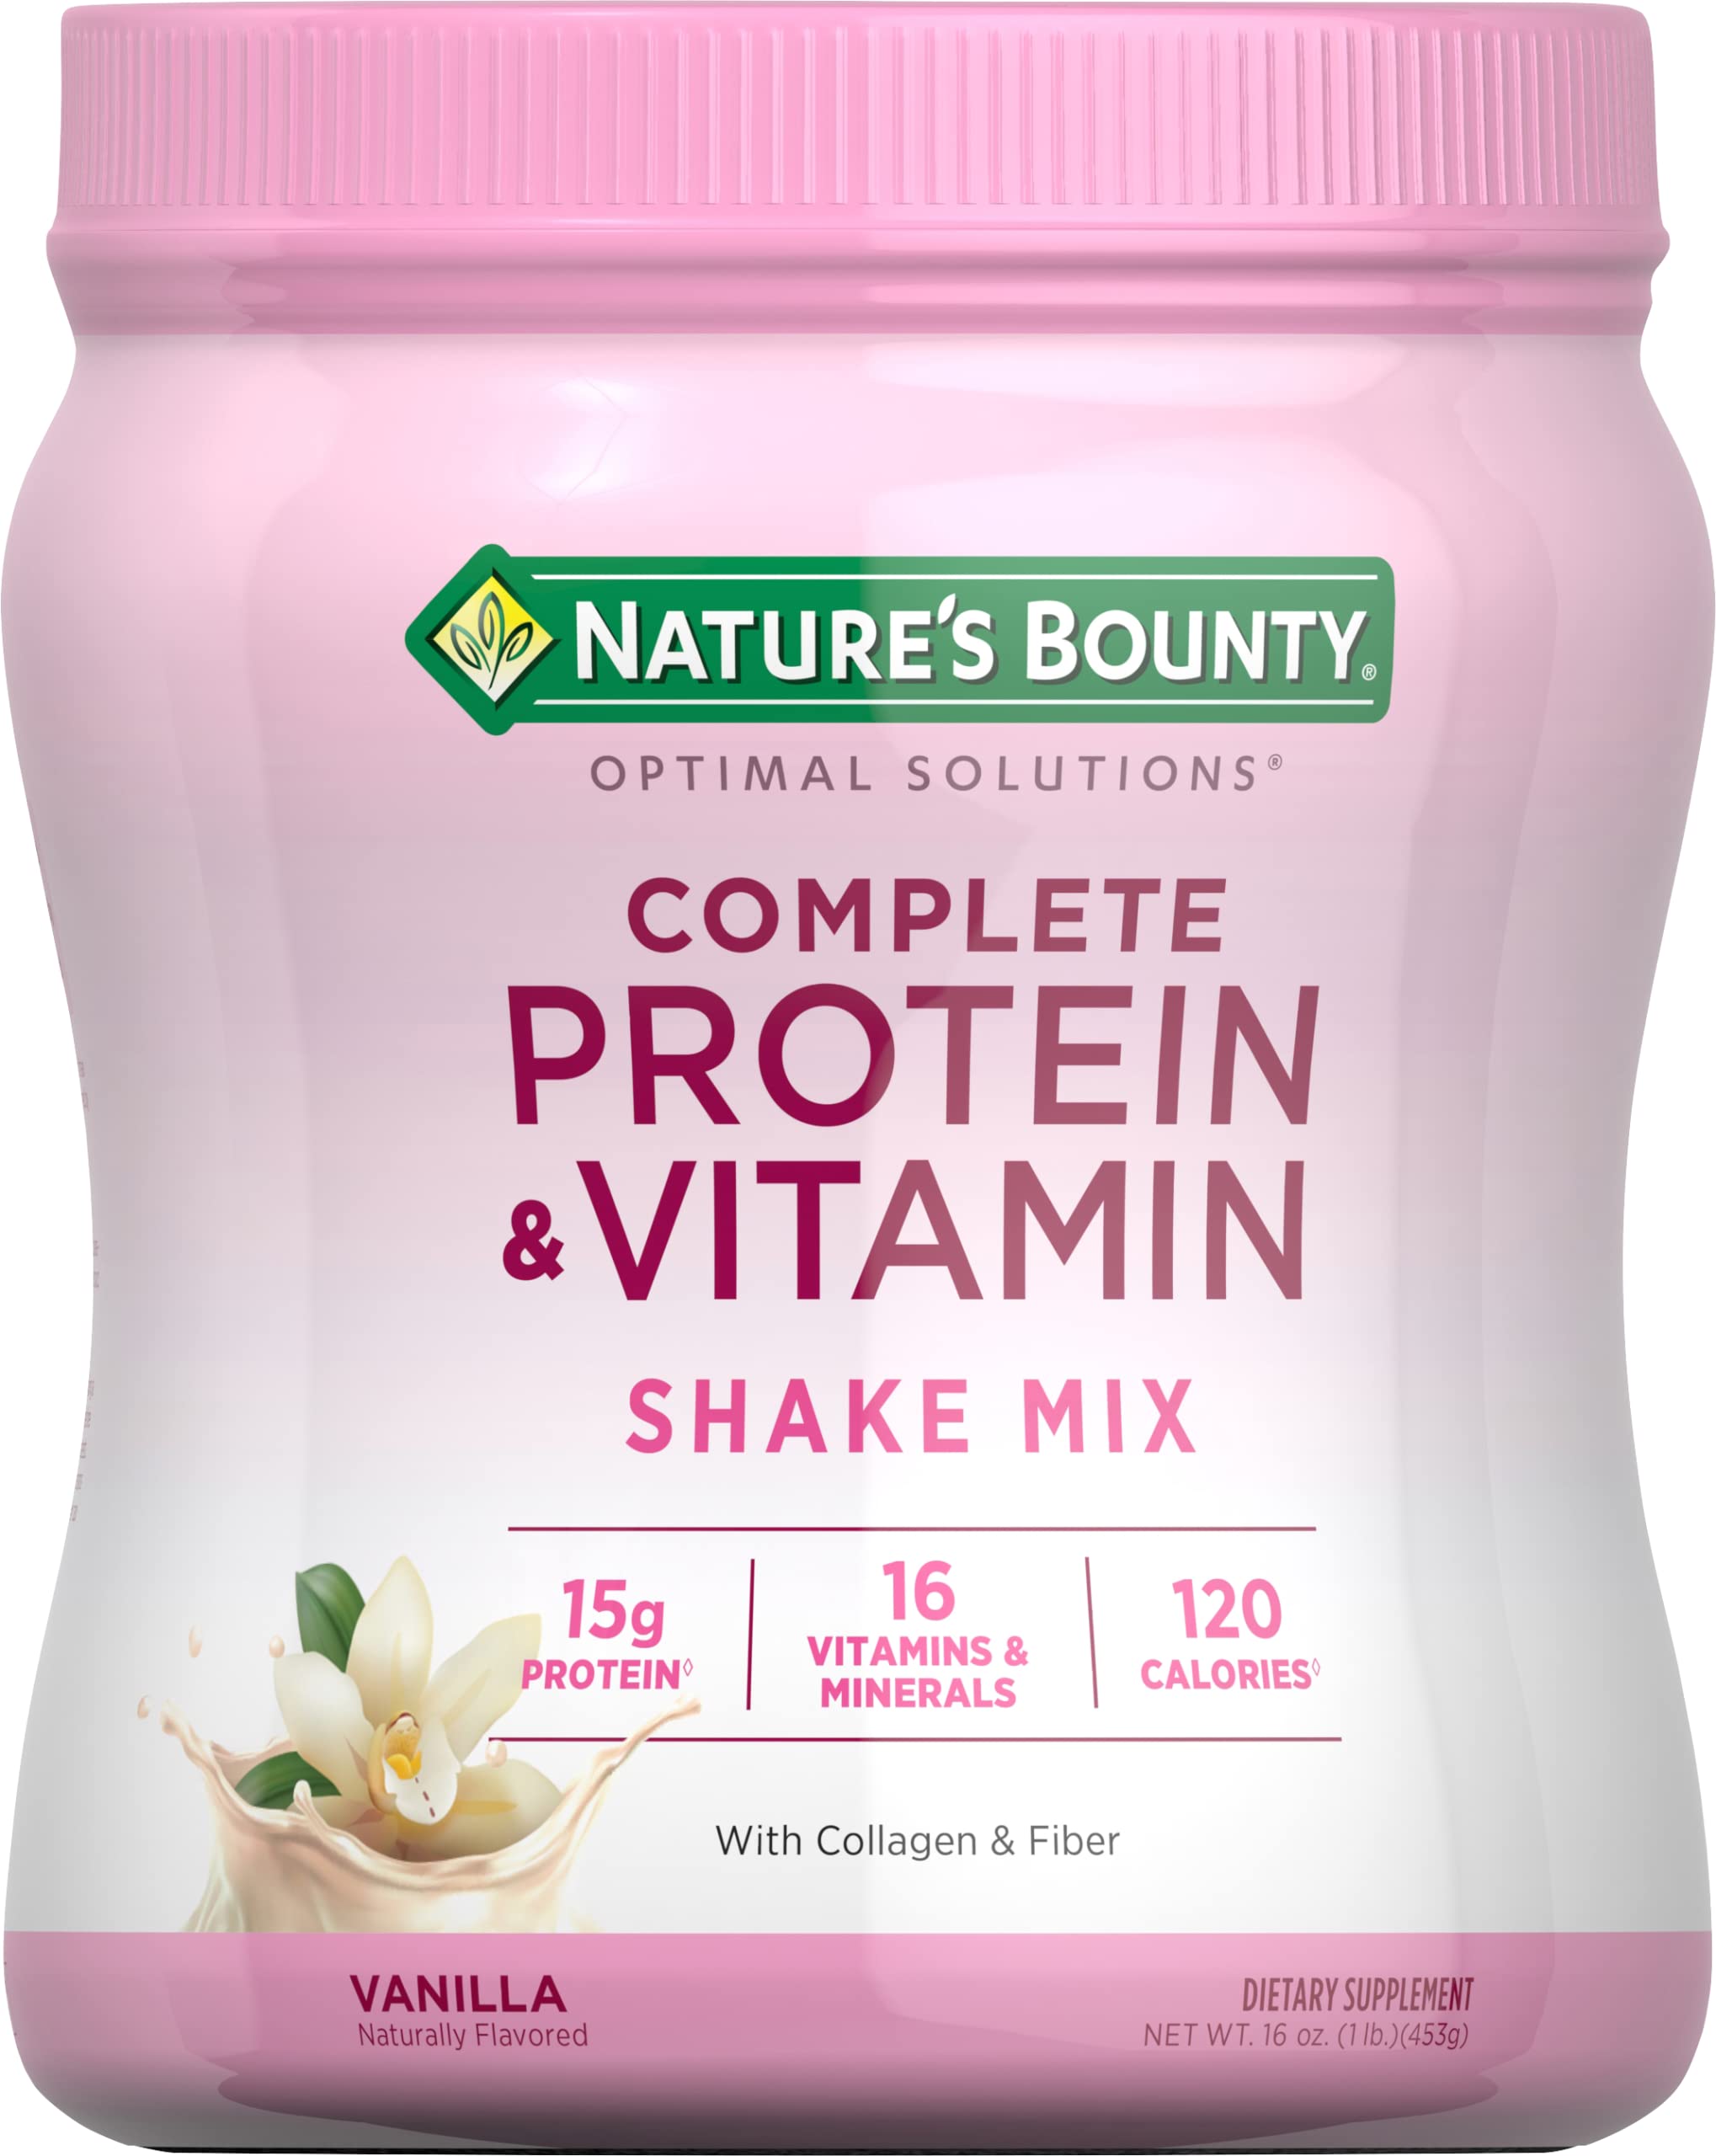 1-Lb Nature's Bounty Complete Protein & Vitamin Shake Mix 2 for $22 ($11 each) w/ S&S + Free Shipping